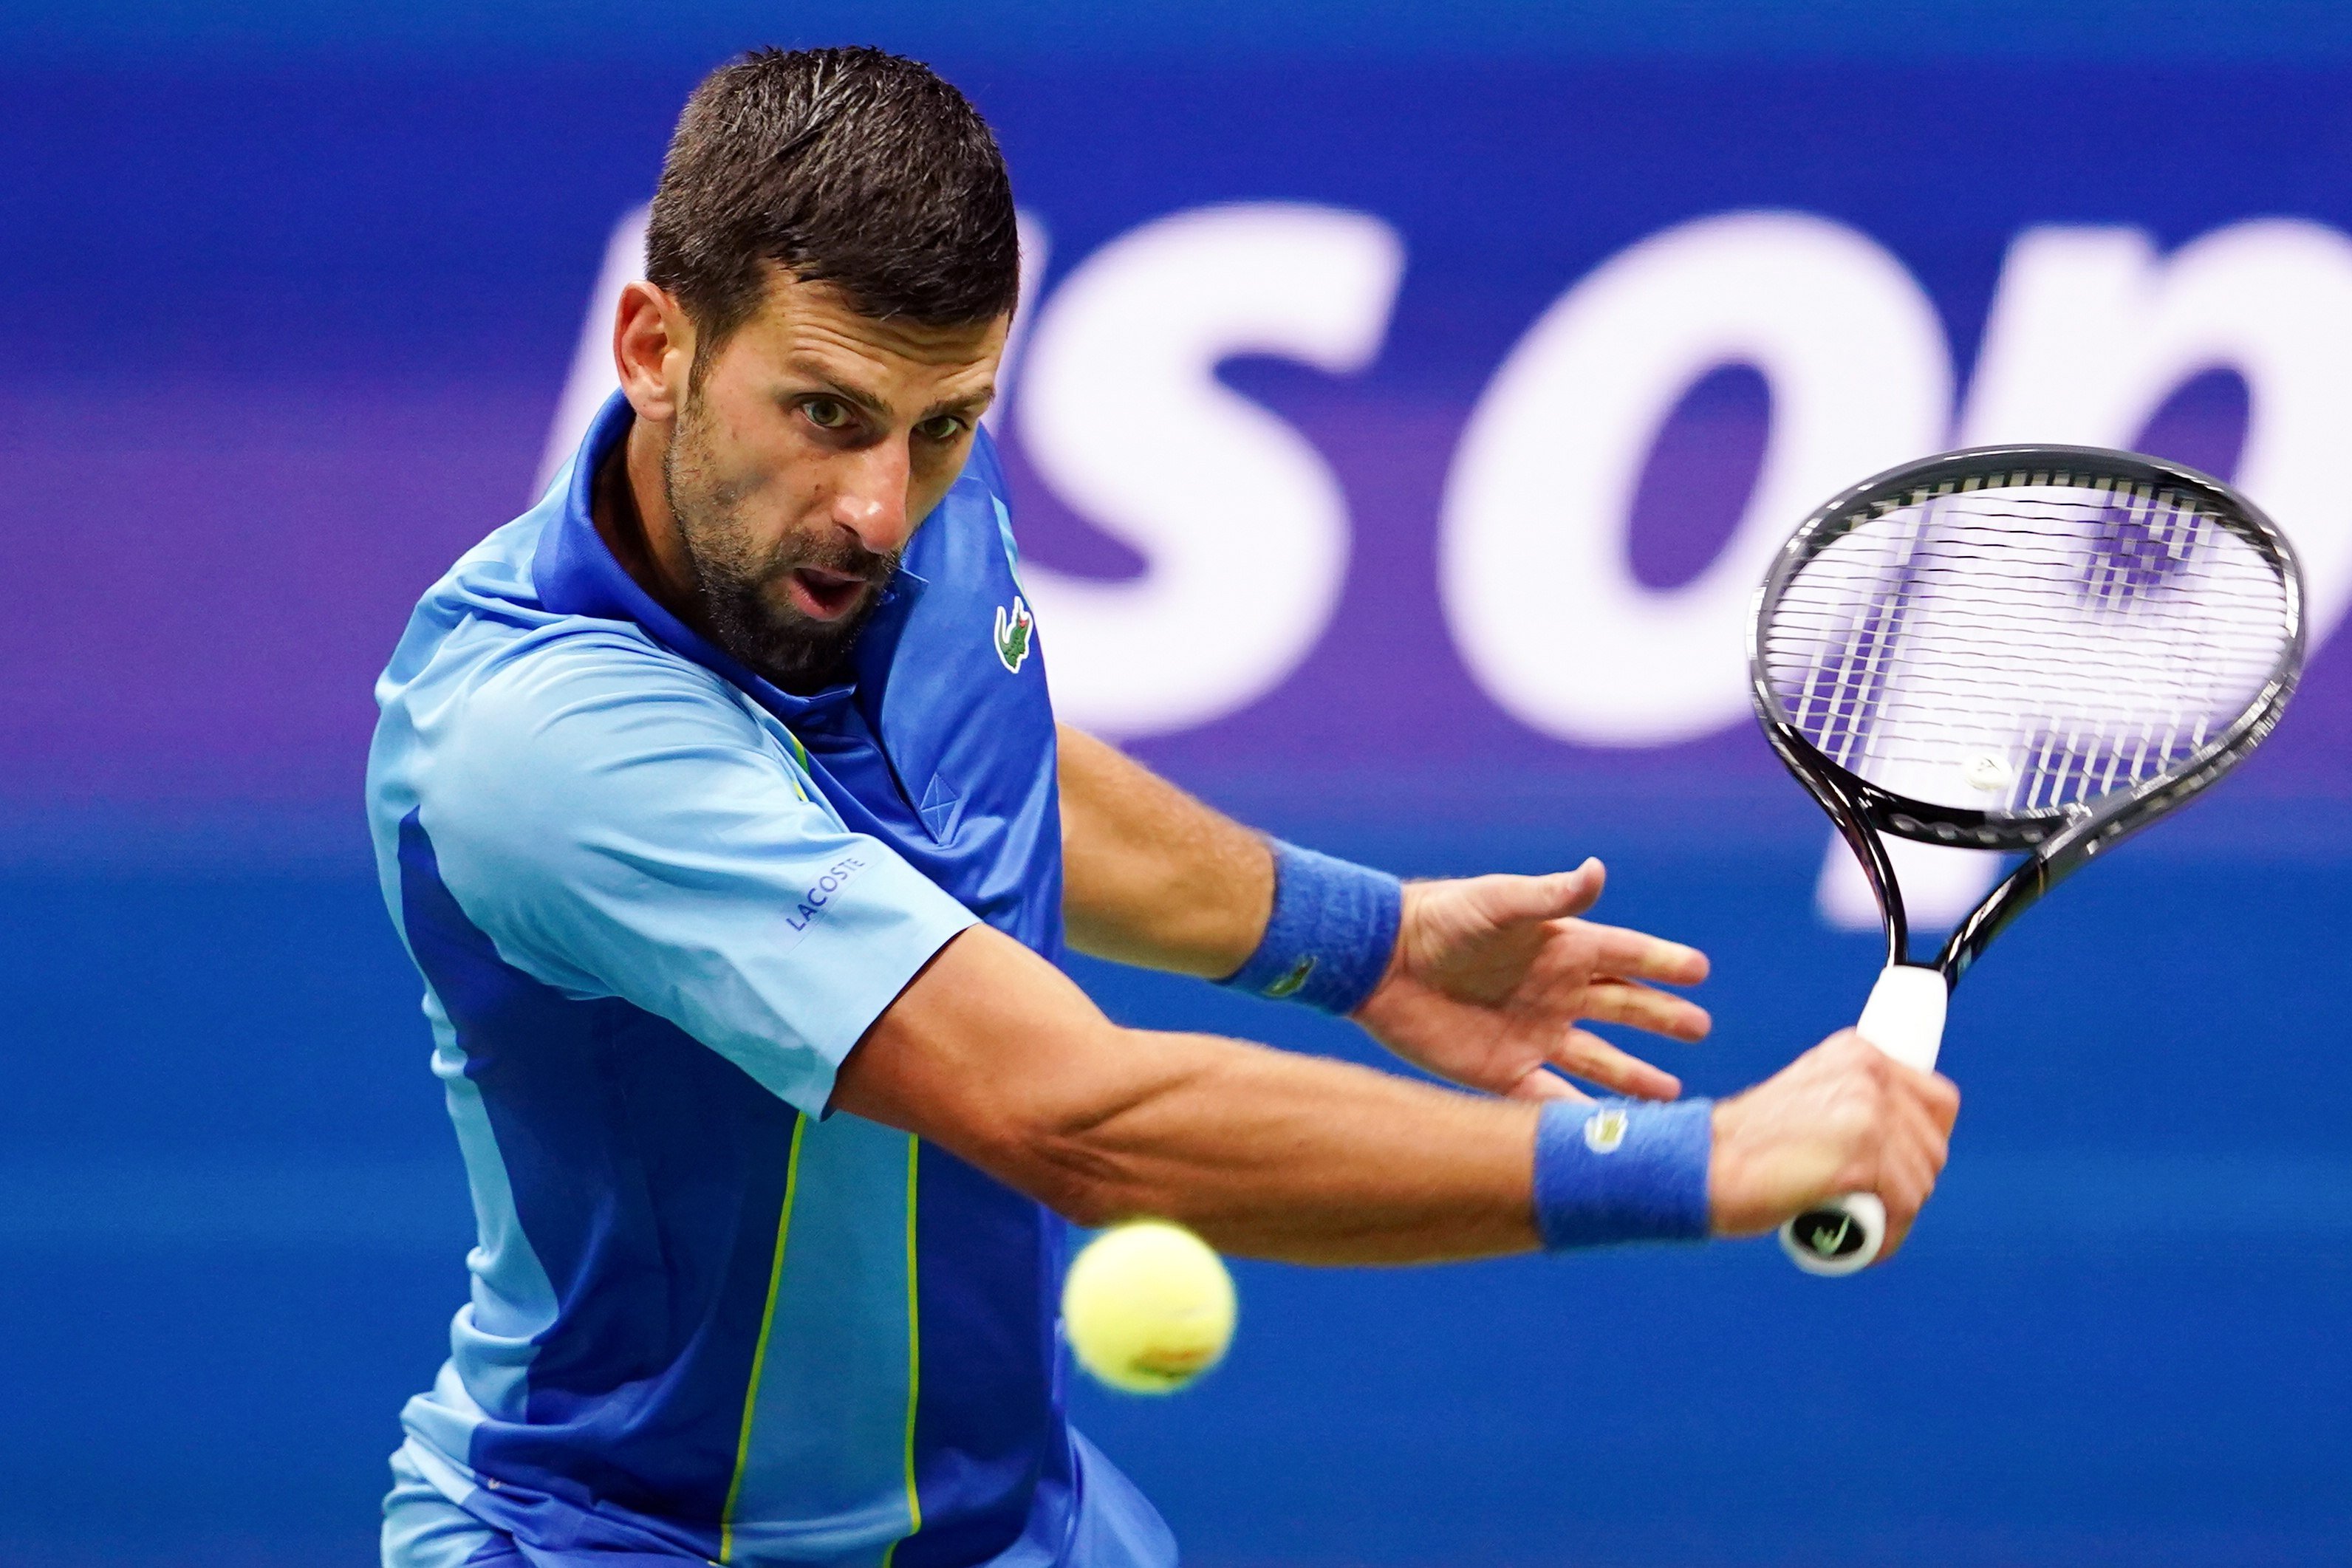 Novak Djokovic of Serbia made a  comeback after being down two sets in the third round match. Photo: EPA-EFE